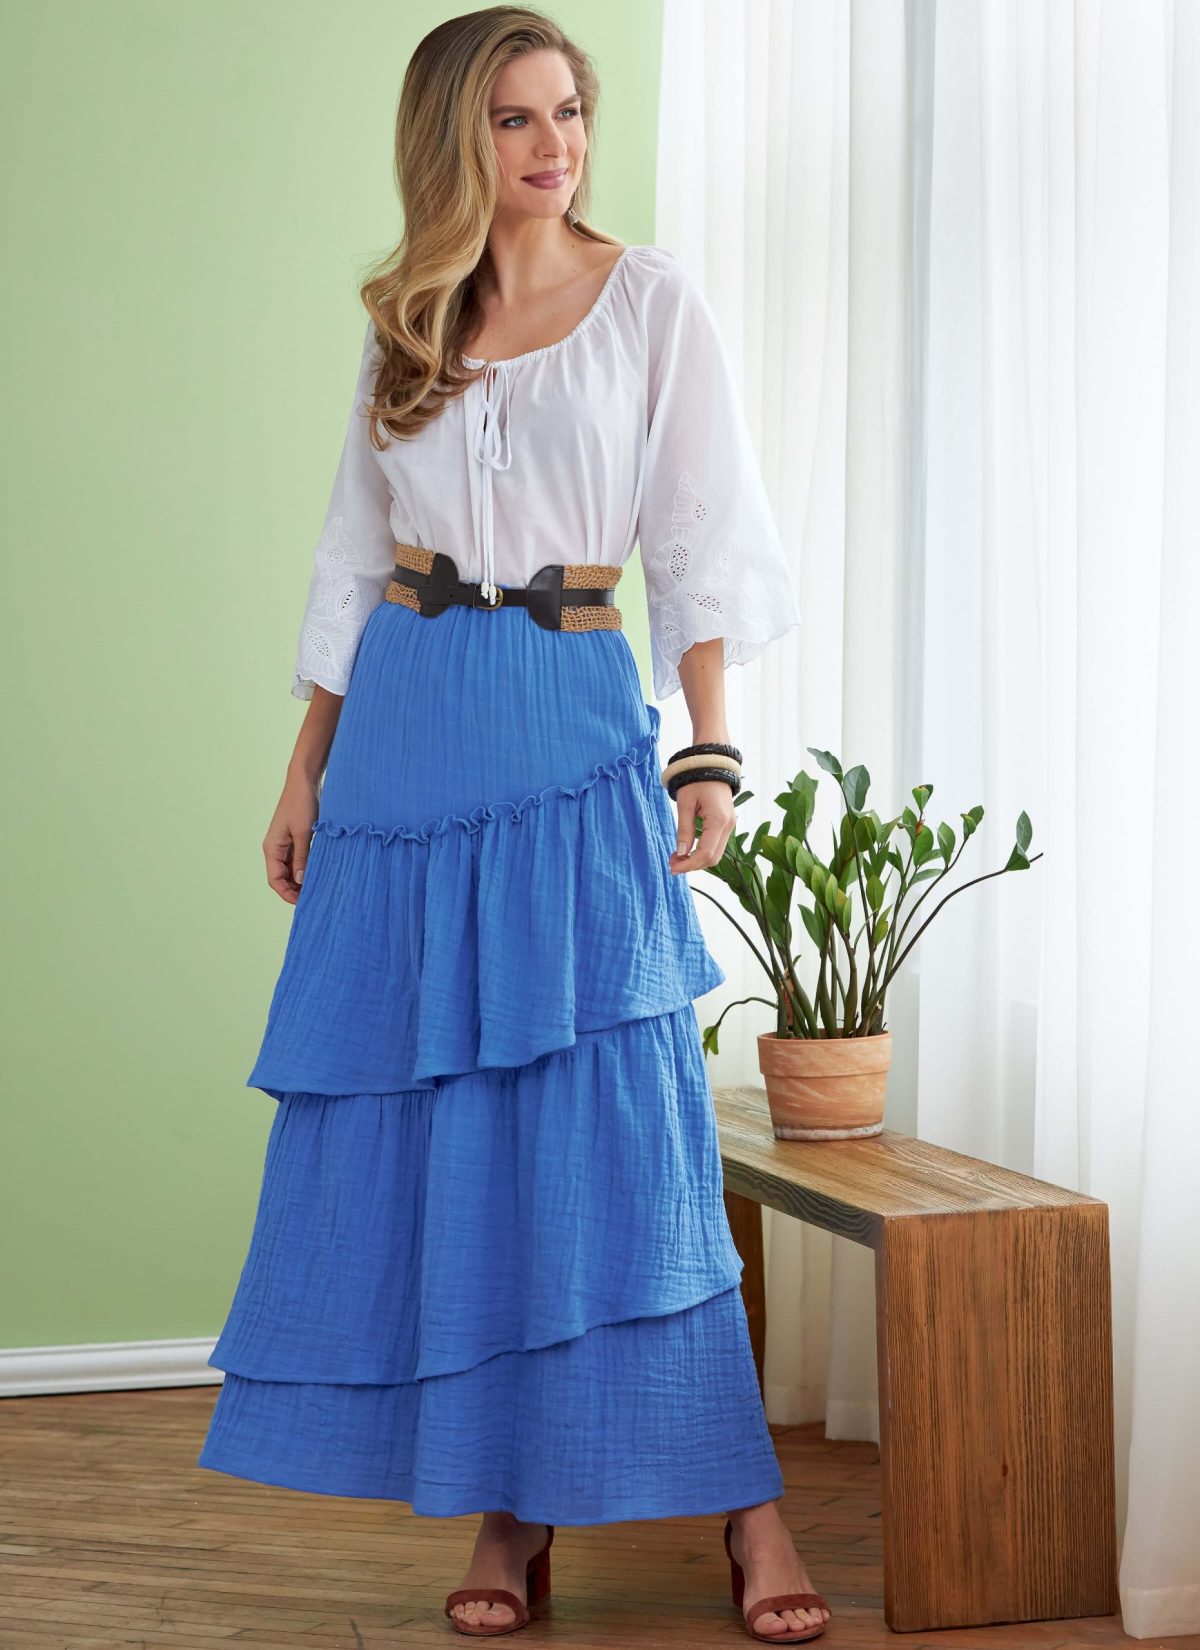 Butterick Sewing Pattern B6736 Misses' Skirts